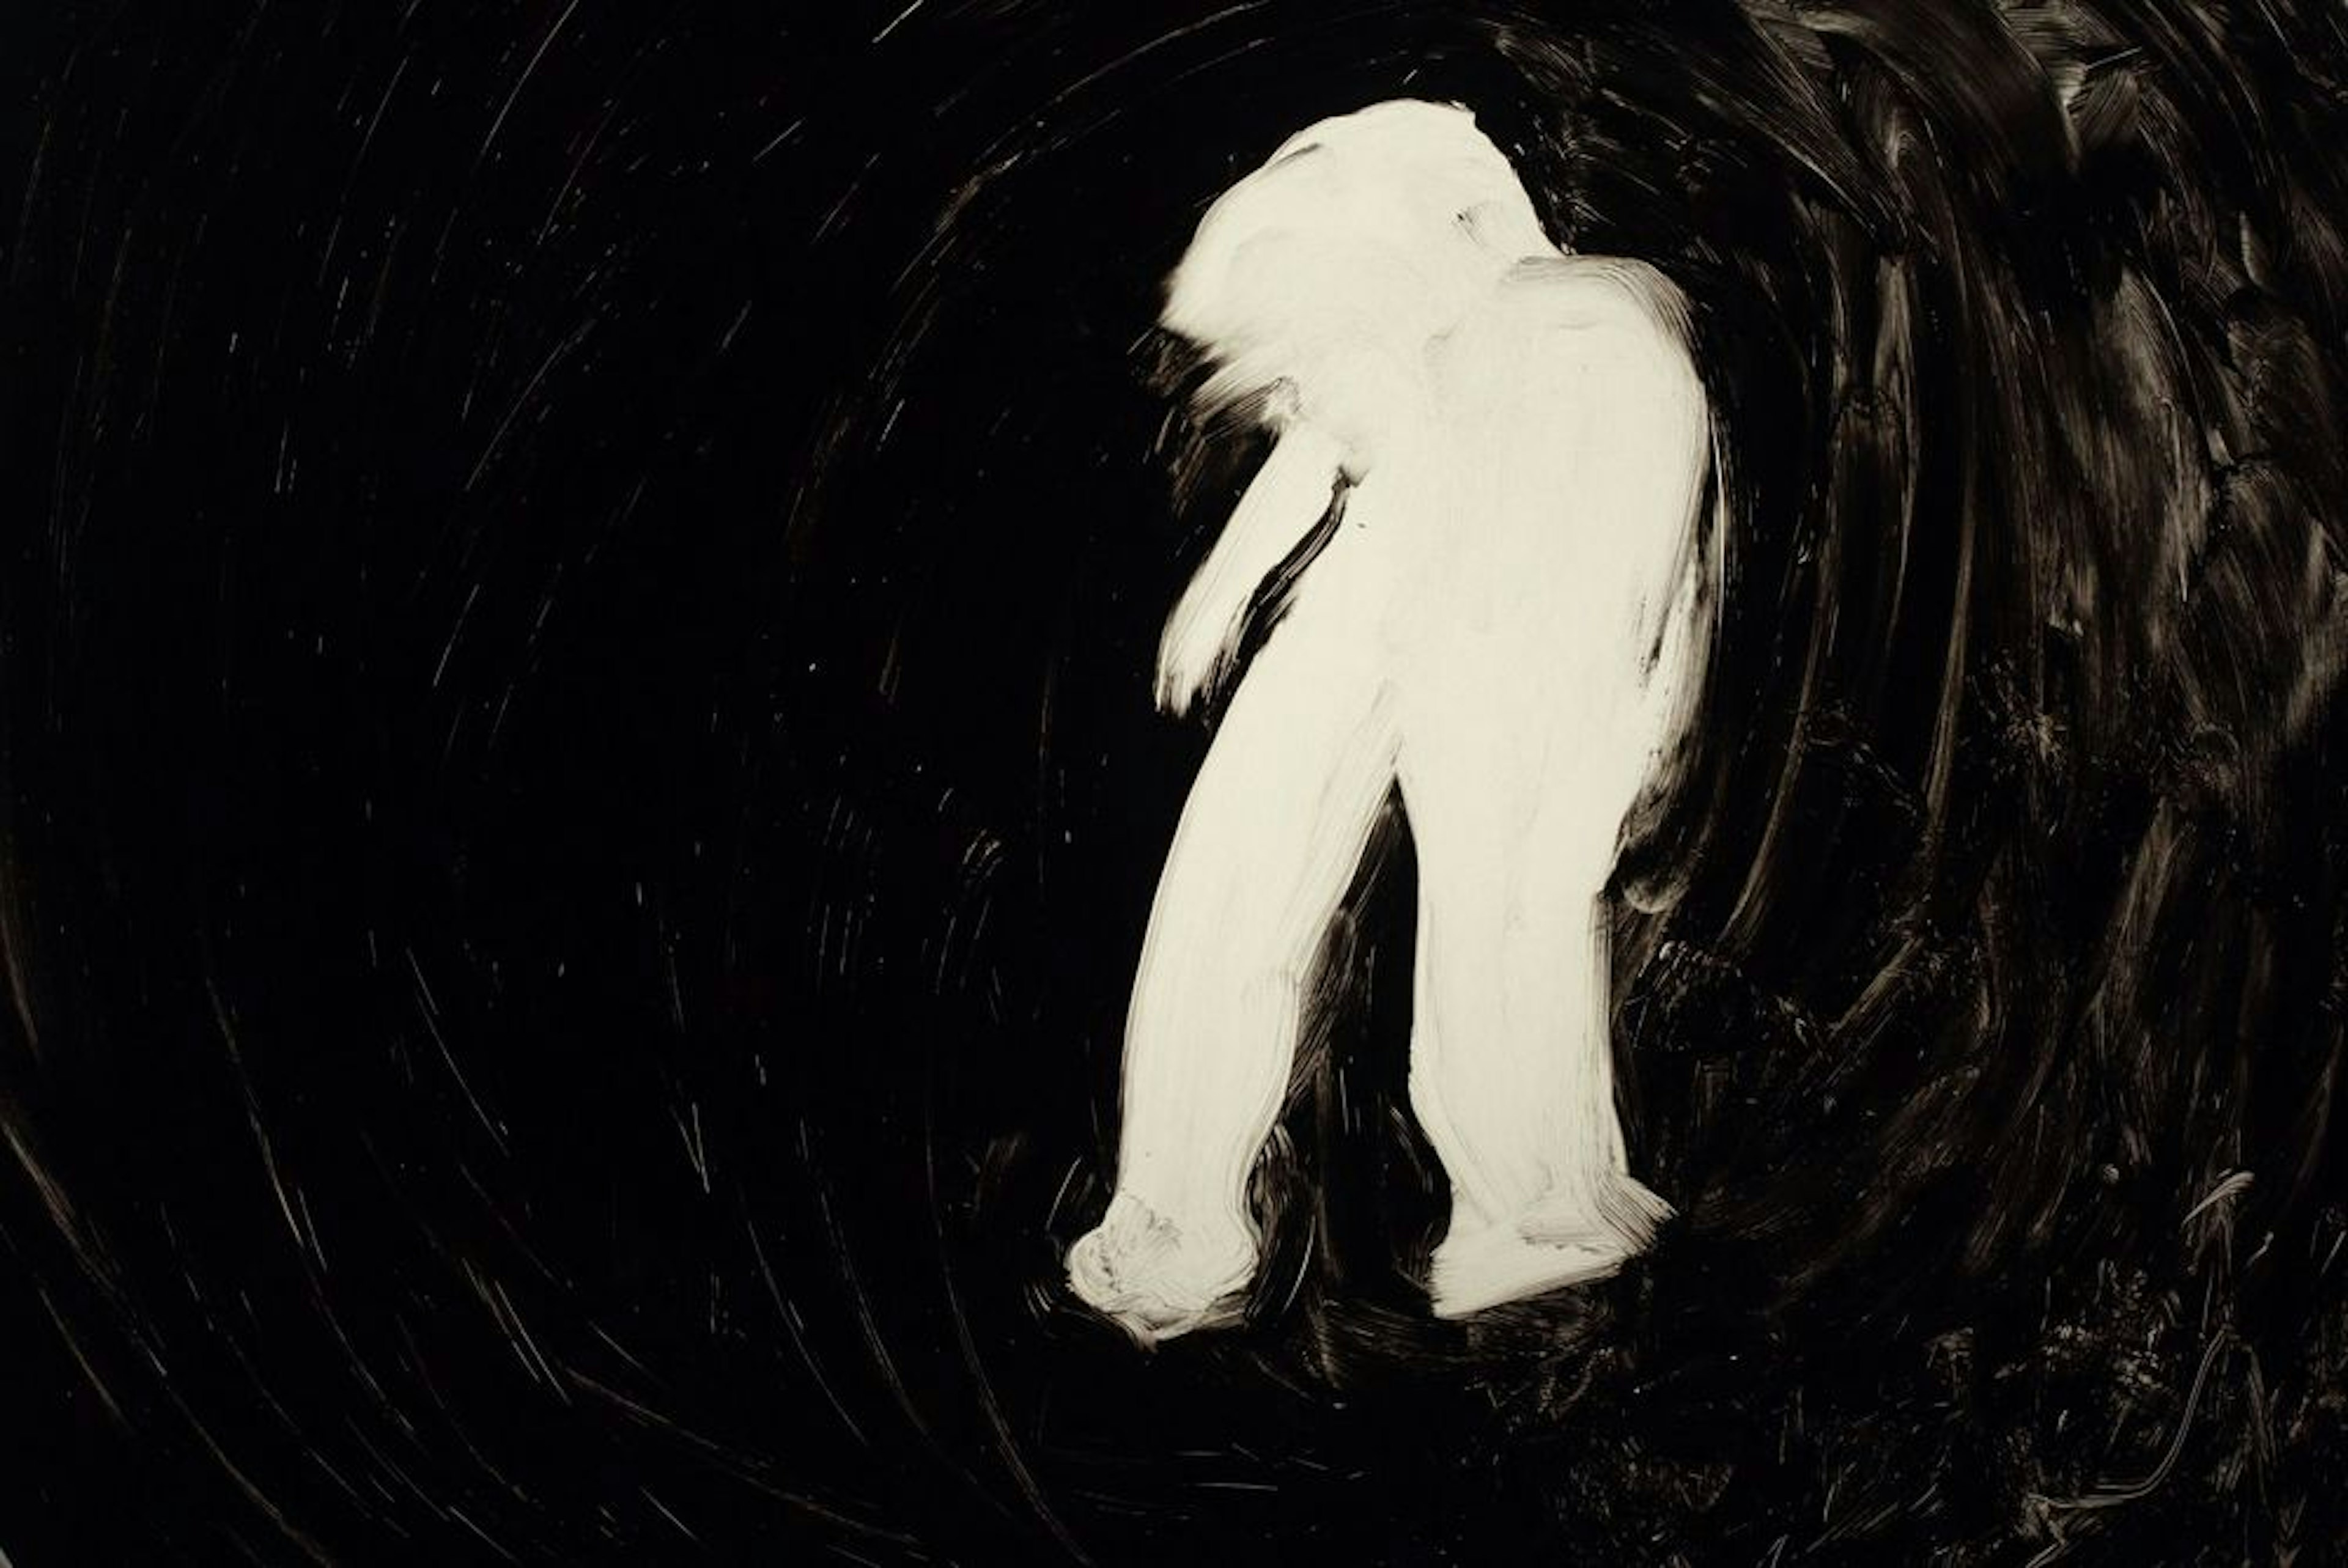 film still showing an abstract painting of a white human figure over a black background 